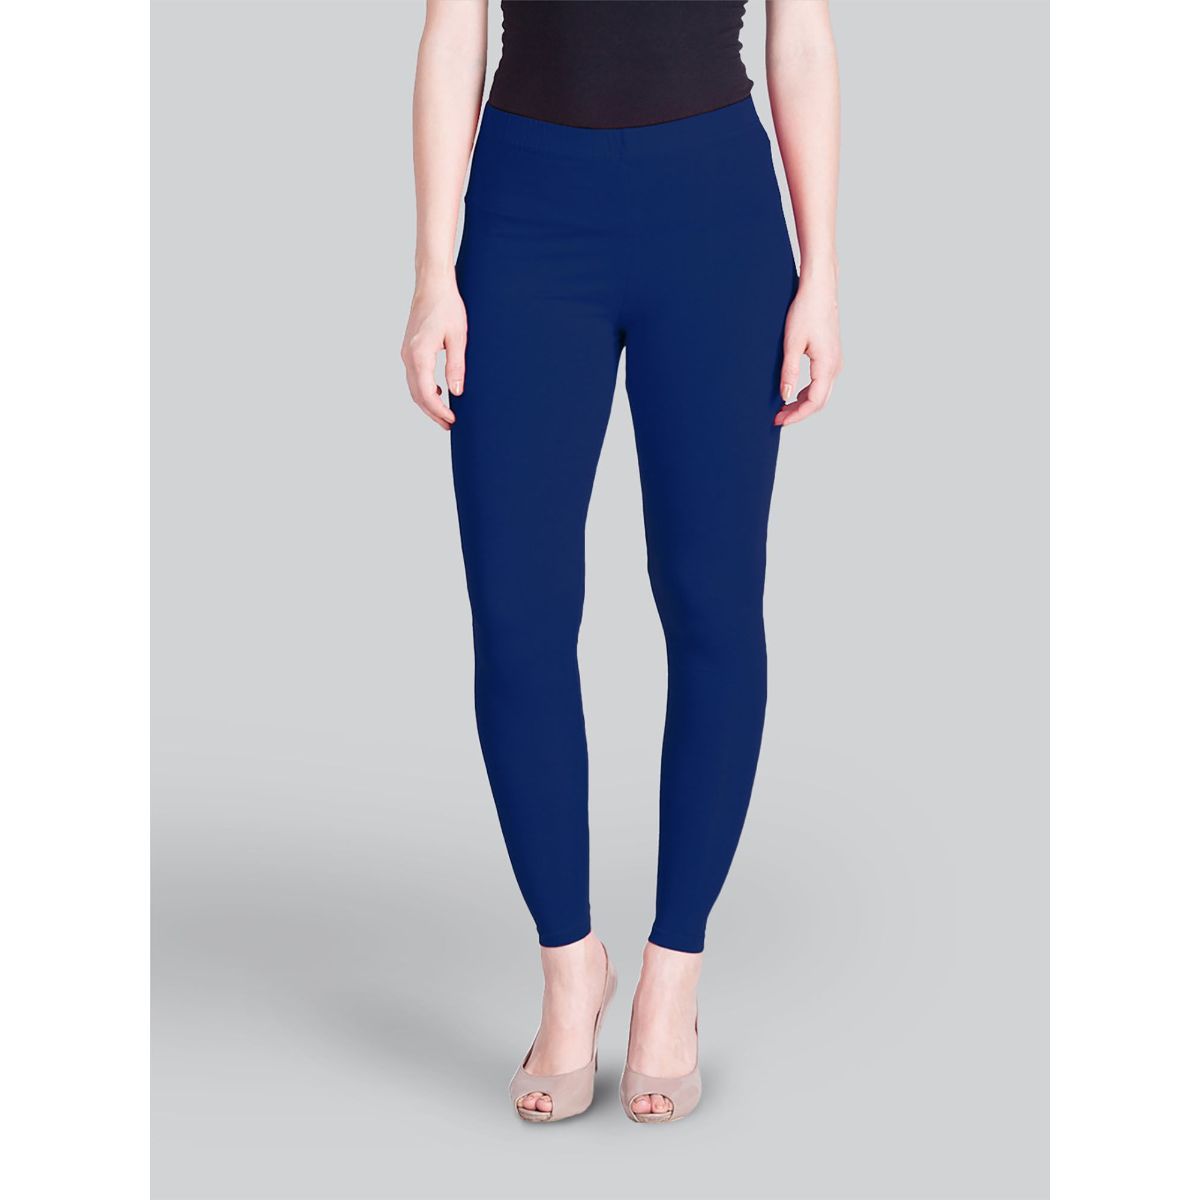 We have a wide range of girls leggings churidar ancle pants and plazzos  products available at factory prices. We offer a variety of colors, sizes  and styles to choose from. Our products